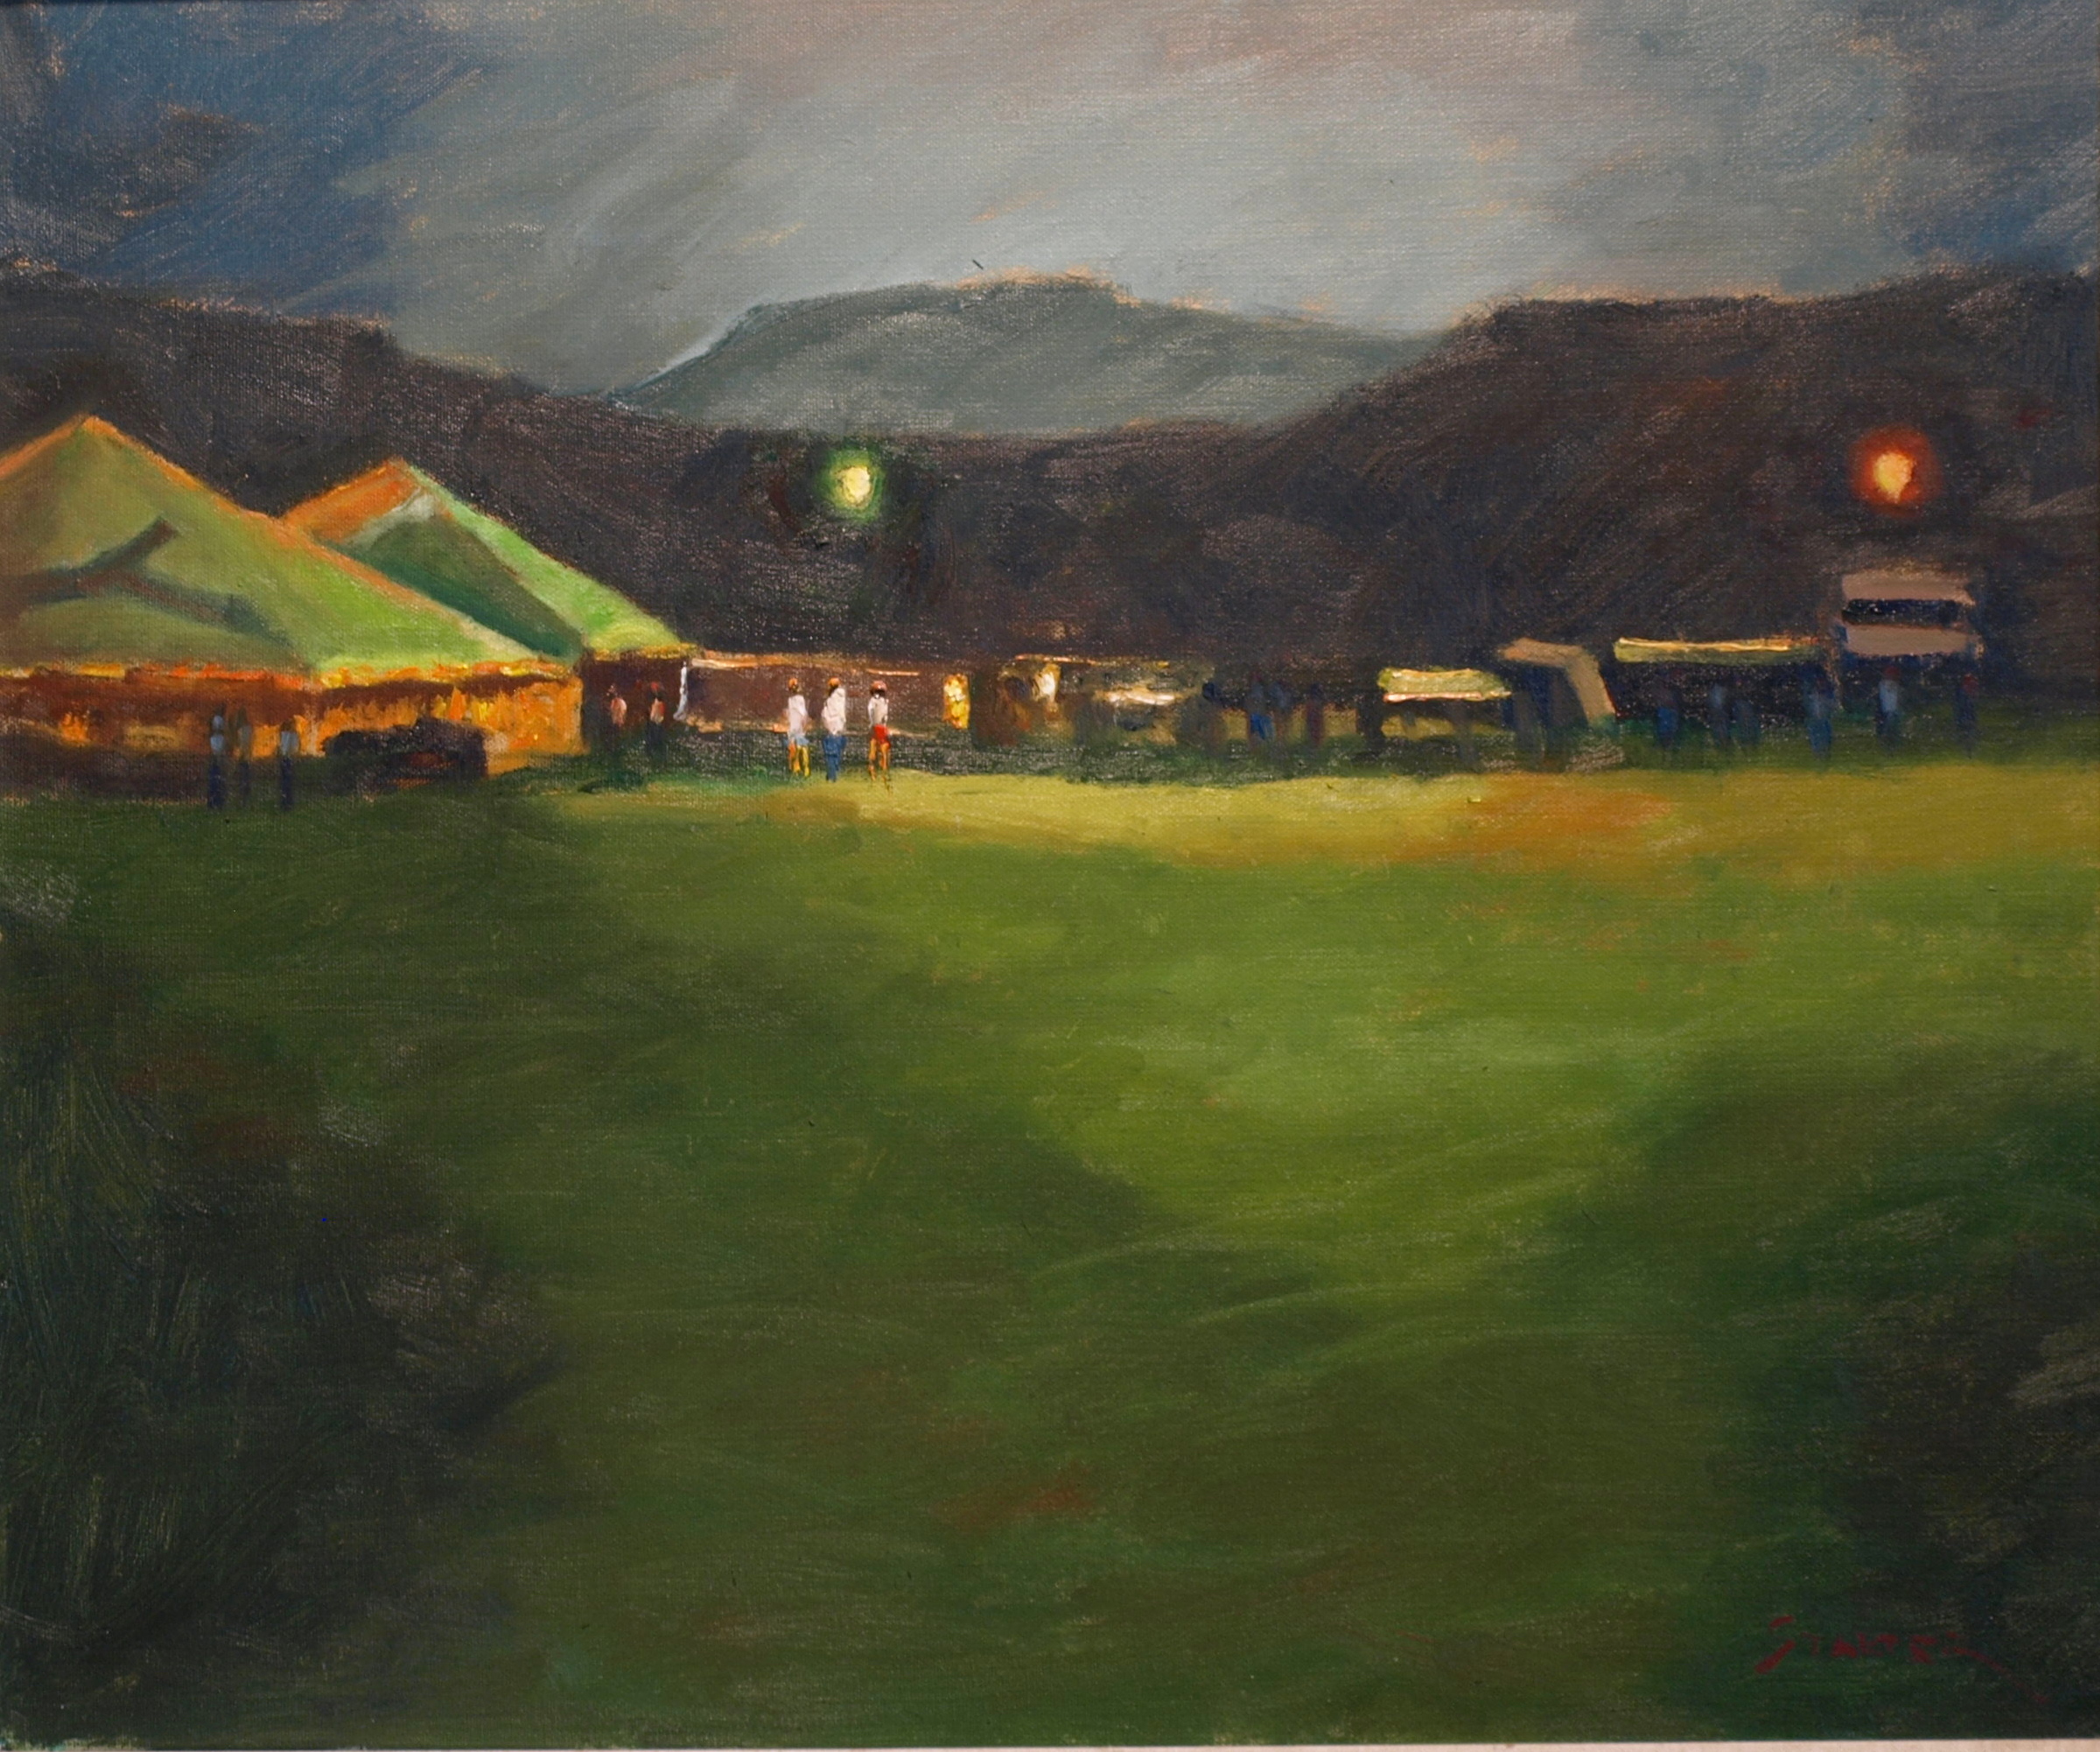 Night at the Fair, Oil on Canvas, 20 x 24 Inches, by Richard Stalter, $750